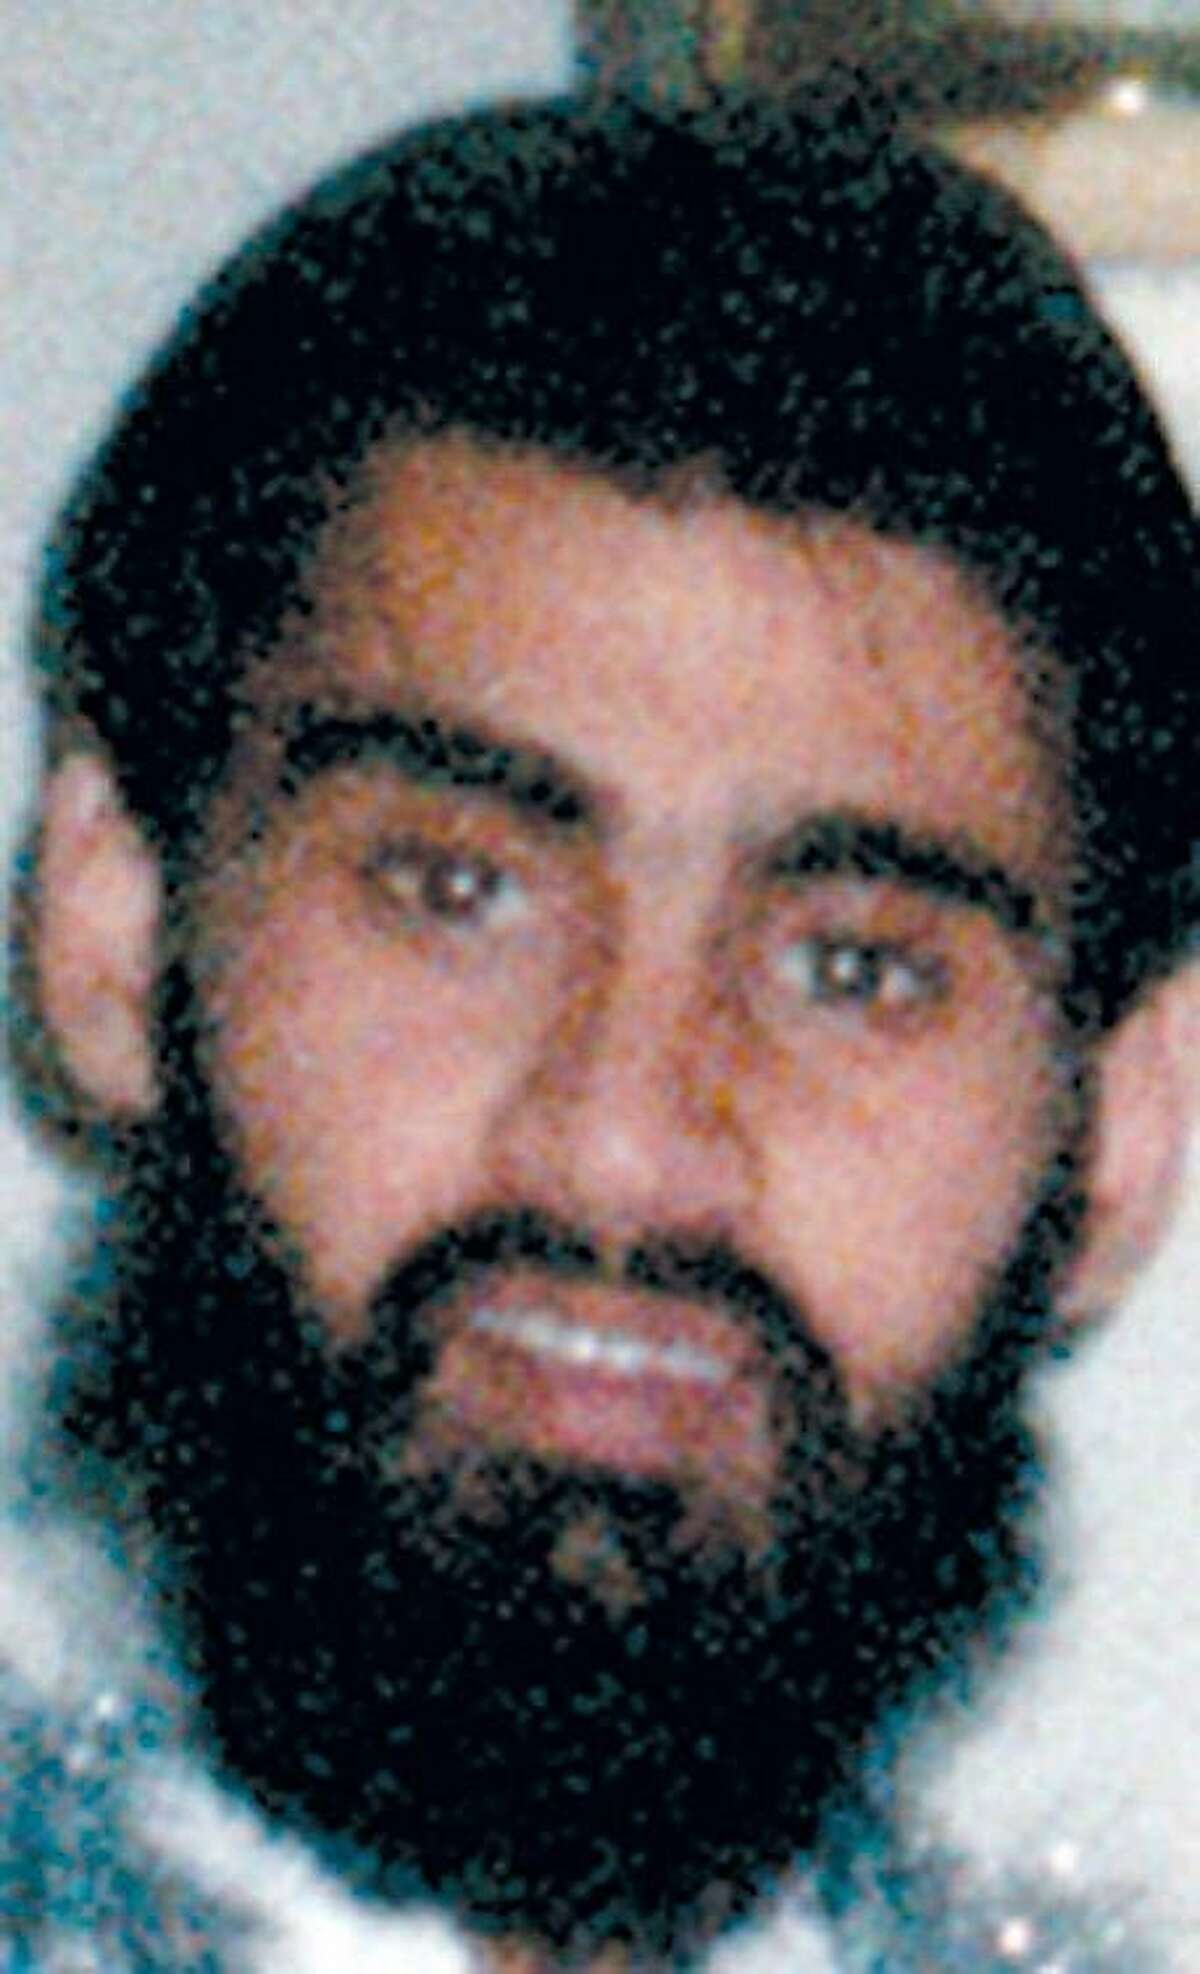 This is an undated photo of Hamid Hayat provided by the Hayat family. Hayat, who is facing federal terrorism charges, "had a jihadi heart and a jihadi mind" long before he confessed to attending an al-Qaida training camp in Pakistan, assistant U.S. Attorney Robert Tice-Raskin said during his closing argument Wednesday, April 12, 2006. Hayat's attorney argued that the government does not have a case because it has no proof that her client ever went to a terrorist training camp. (AP Photo/Hayat family via Lodi News-Sentinel) ** MAGS OUT NO SALES **Ran on: 04-14-2006 Umer HayatRan on: 04-14-2006 Ran on: 04-14-2006 Umer HayatRan on: 04-14-2006 Ran on: 04-26-2006 Johnny Griffin (left), Umer Hayats attorney, and Wazhma Mojaddidi, Hamid Hayats lawyer, address the media after the verdicts.Ran on: 04-26-2006 Johnny Griffin (left), Umer Hayats attorney, and Wazhma Mojaddidi, Hamid Hayats lawyer, address the media after the verdicts.Ran on: 04-26-2006 Ran on: 05-04-2006 Hamid Hayat Ran on: 05-20-2006 Hamid Hayat Ran on: 06-01-2006 Umer Hayat and his attorney Johnny Griffin talk with reporters. Hayat is to be sentenced to time served and three years probation. Ran on: 06-01-2006 Umer Hayat and his attorney Johnny Griffin talk with reporters. Hayat is to be sentenced to time served and three years probation. Ran on: 04-07-2007 Hamid Hayat seeks a new trial on grounds of jury misconduct; a judges decision is pending. He was convicted of abetting terrorists and lying to the FBI. ALSO Ran on: 09-11-2007 Josh McCown